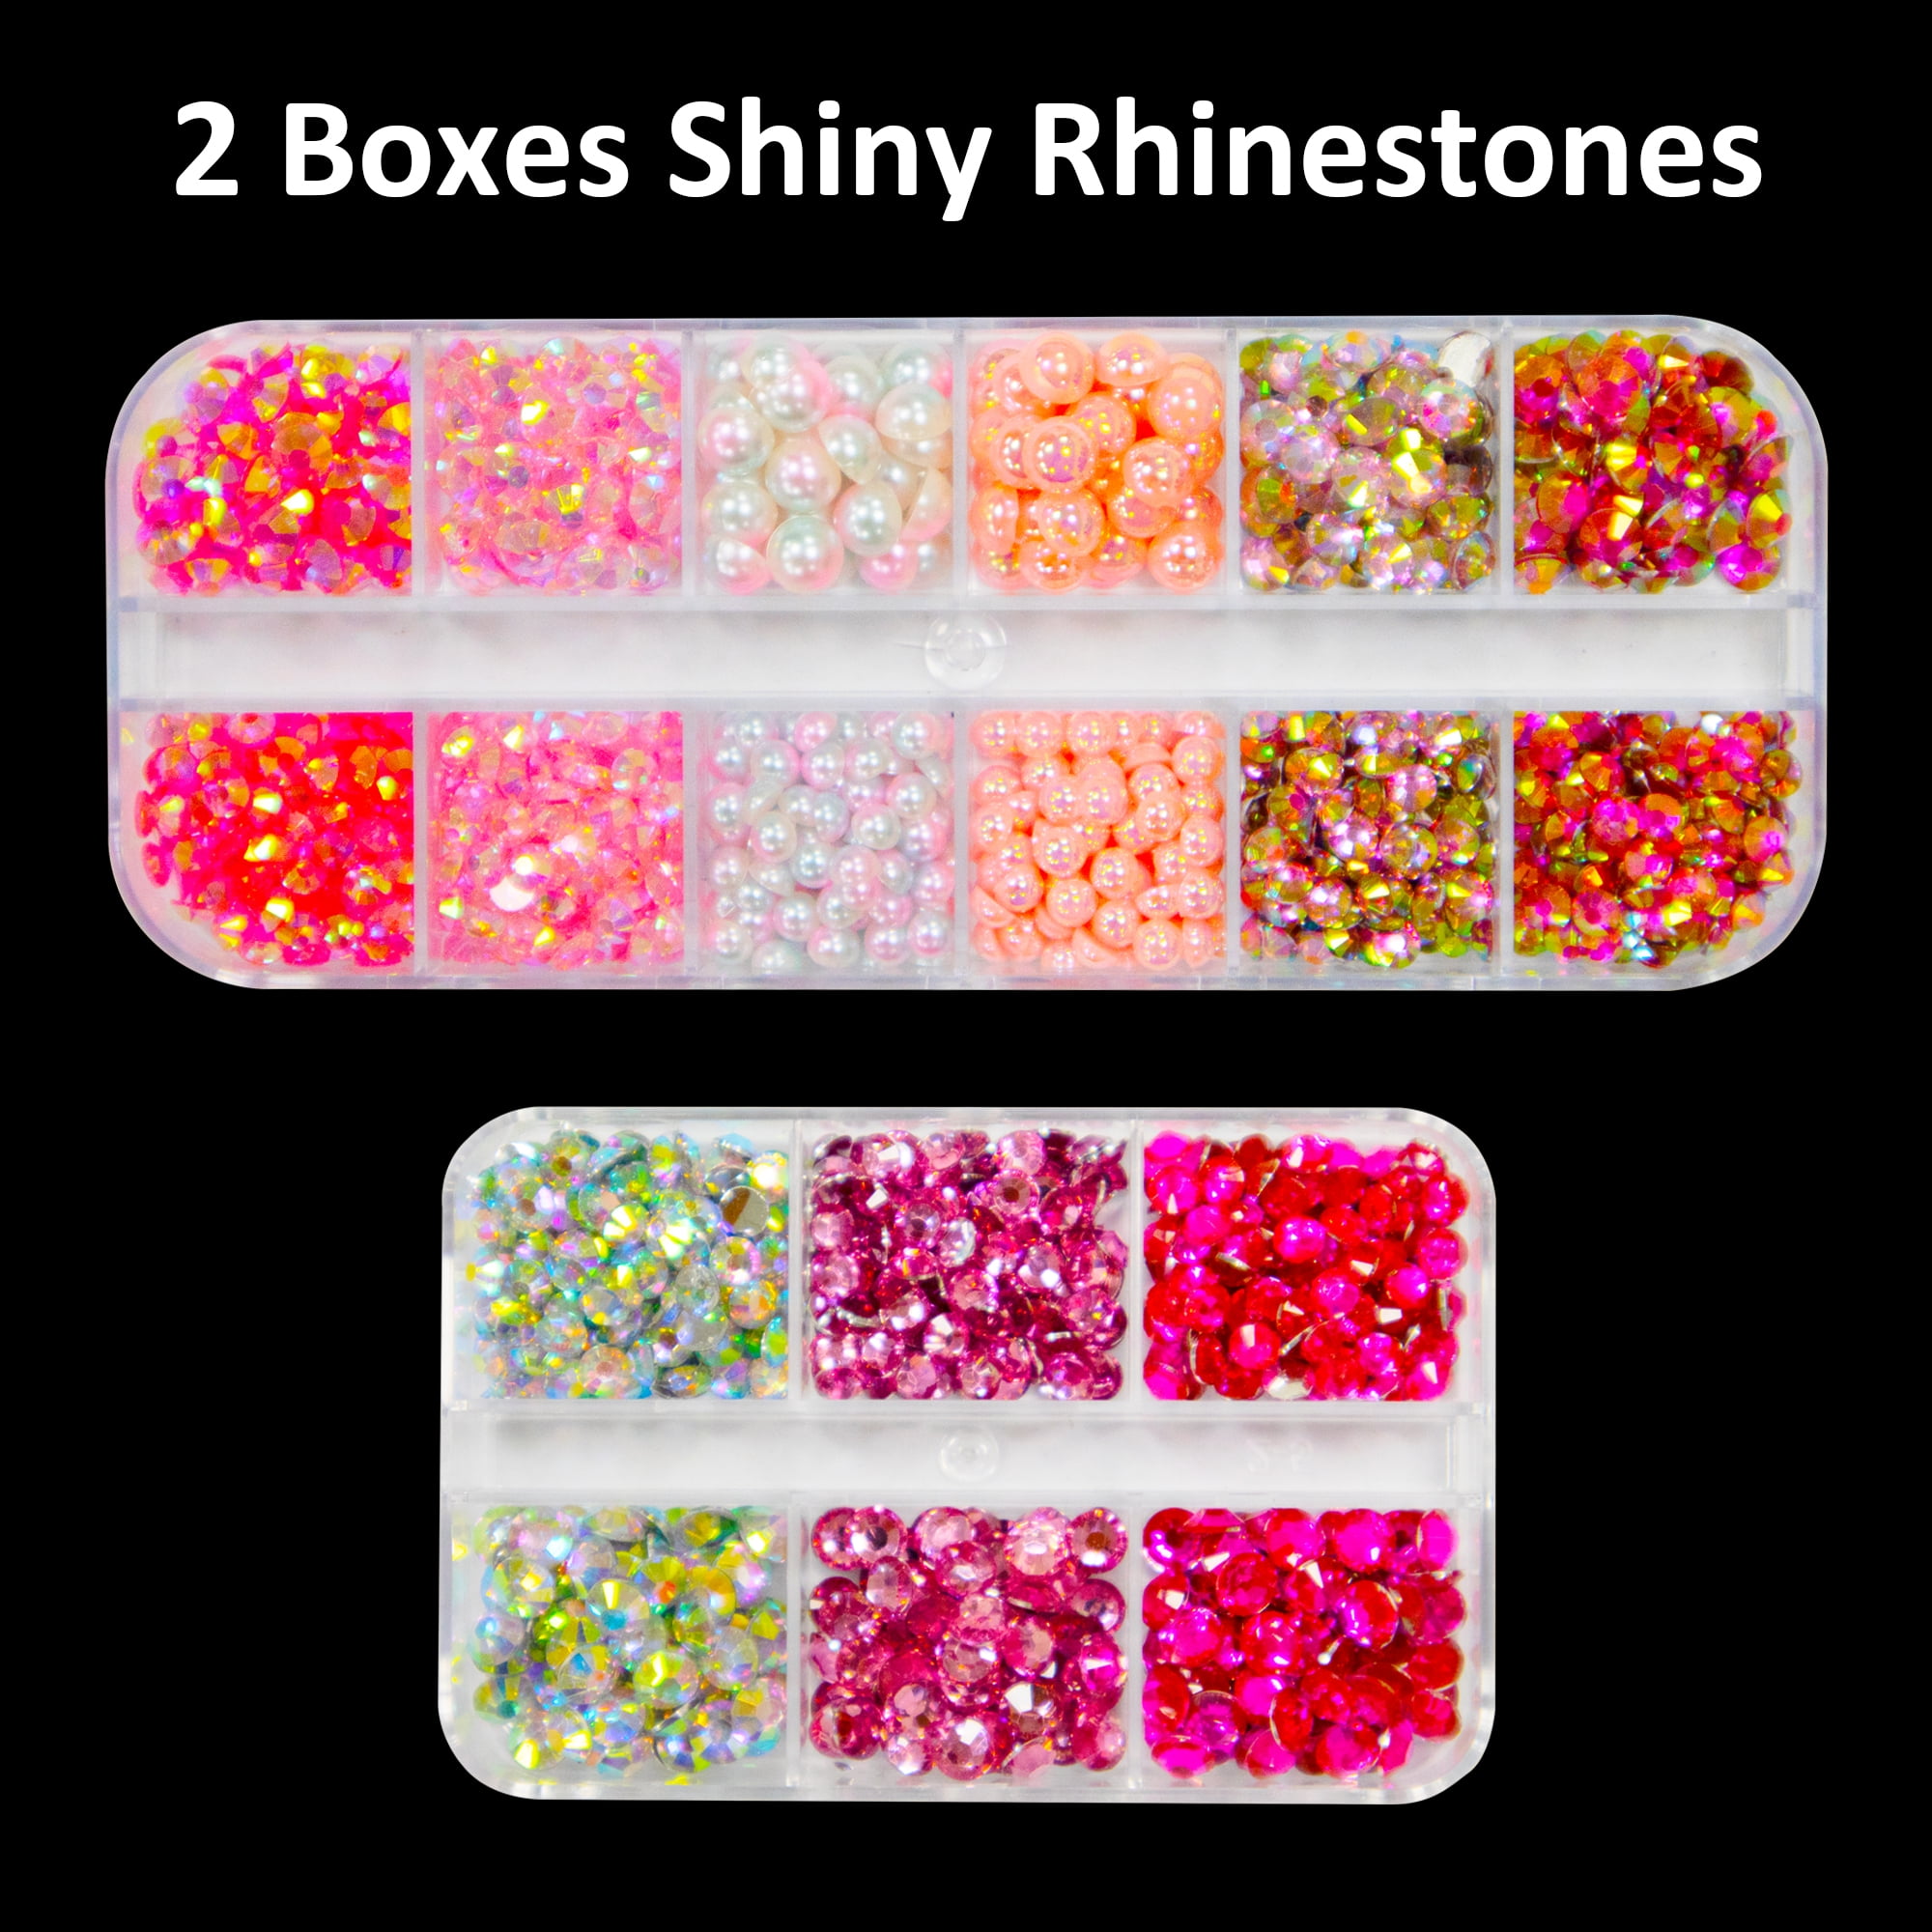 Worthofbest Rhinestones for Crafts with Gem Glue Gel, Bedazzler Kit with Rhinestones Flatback Crystals for Crafts Bling Kit Adhesive, Flat Back